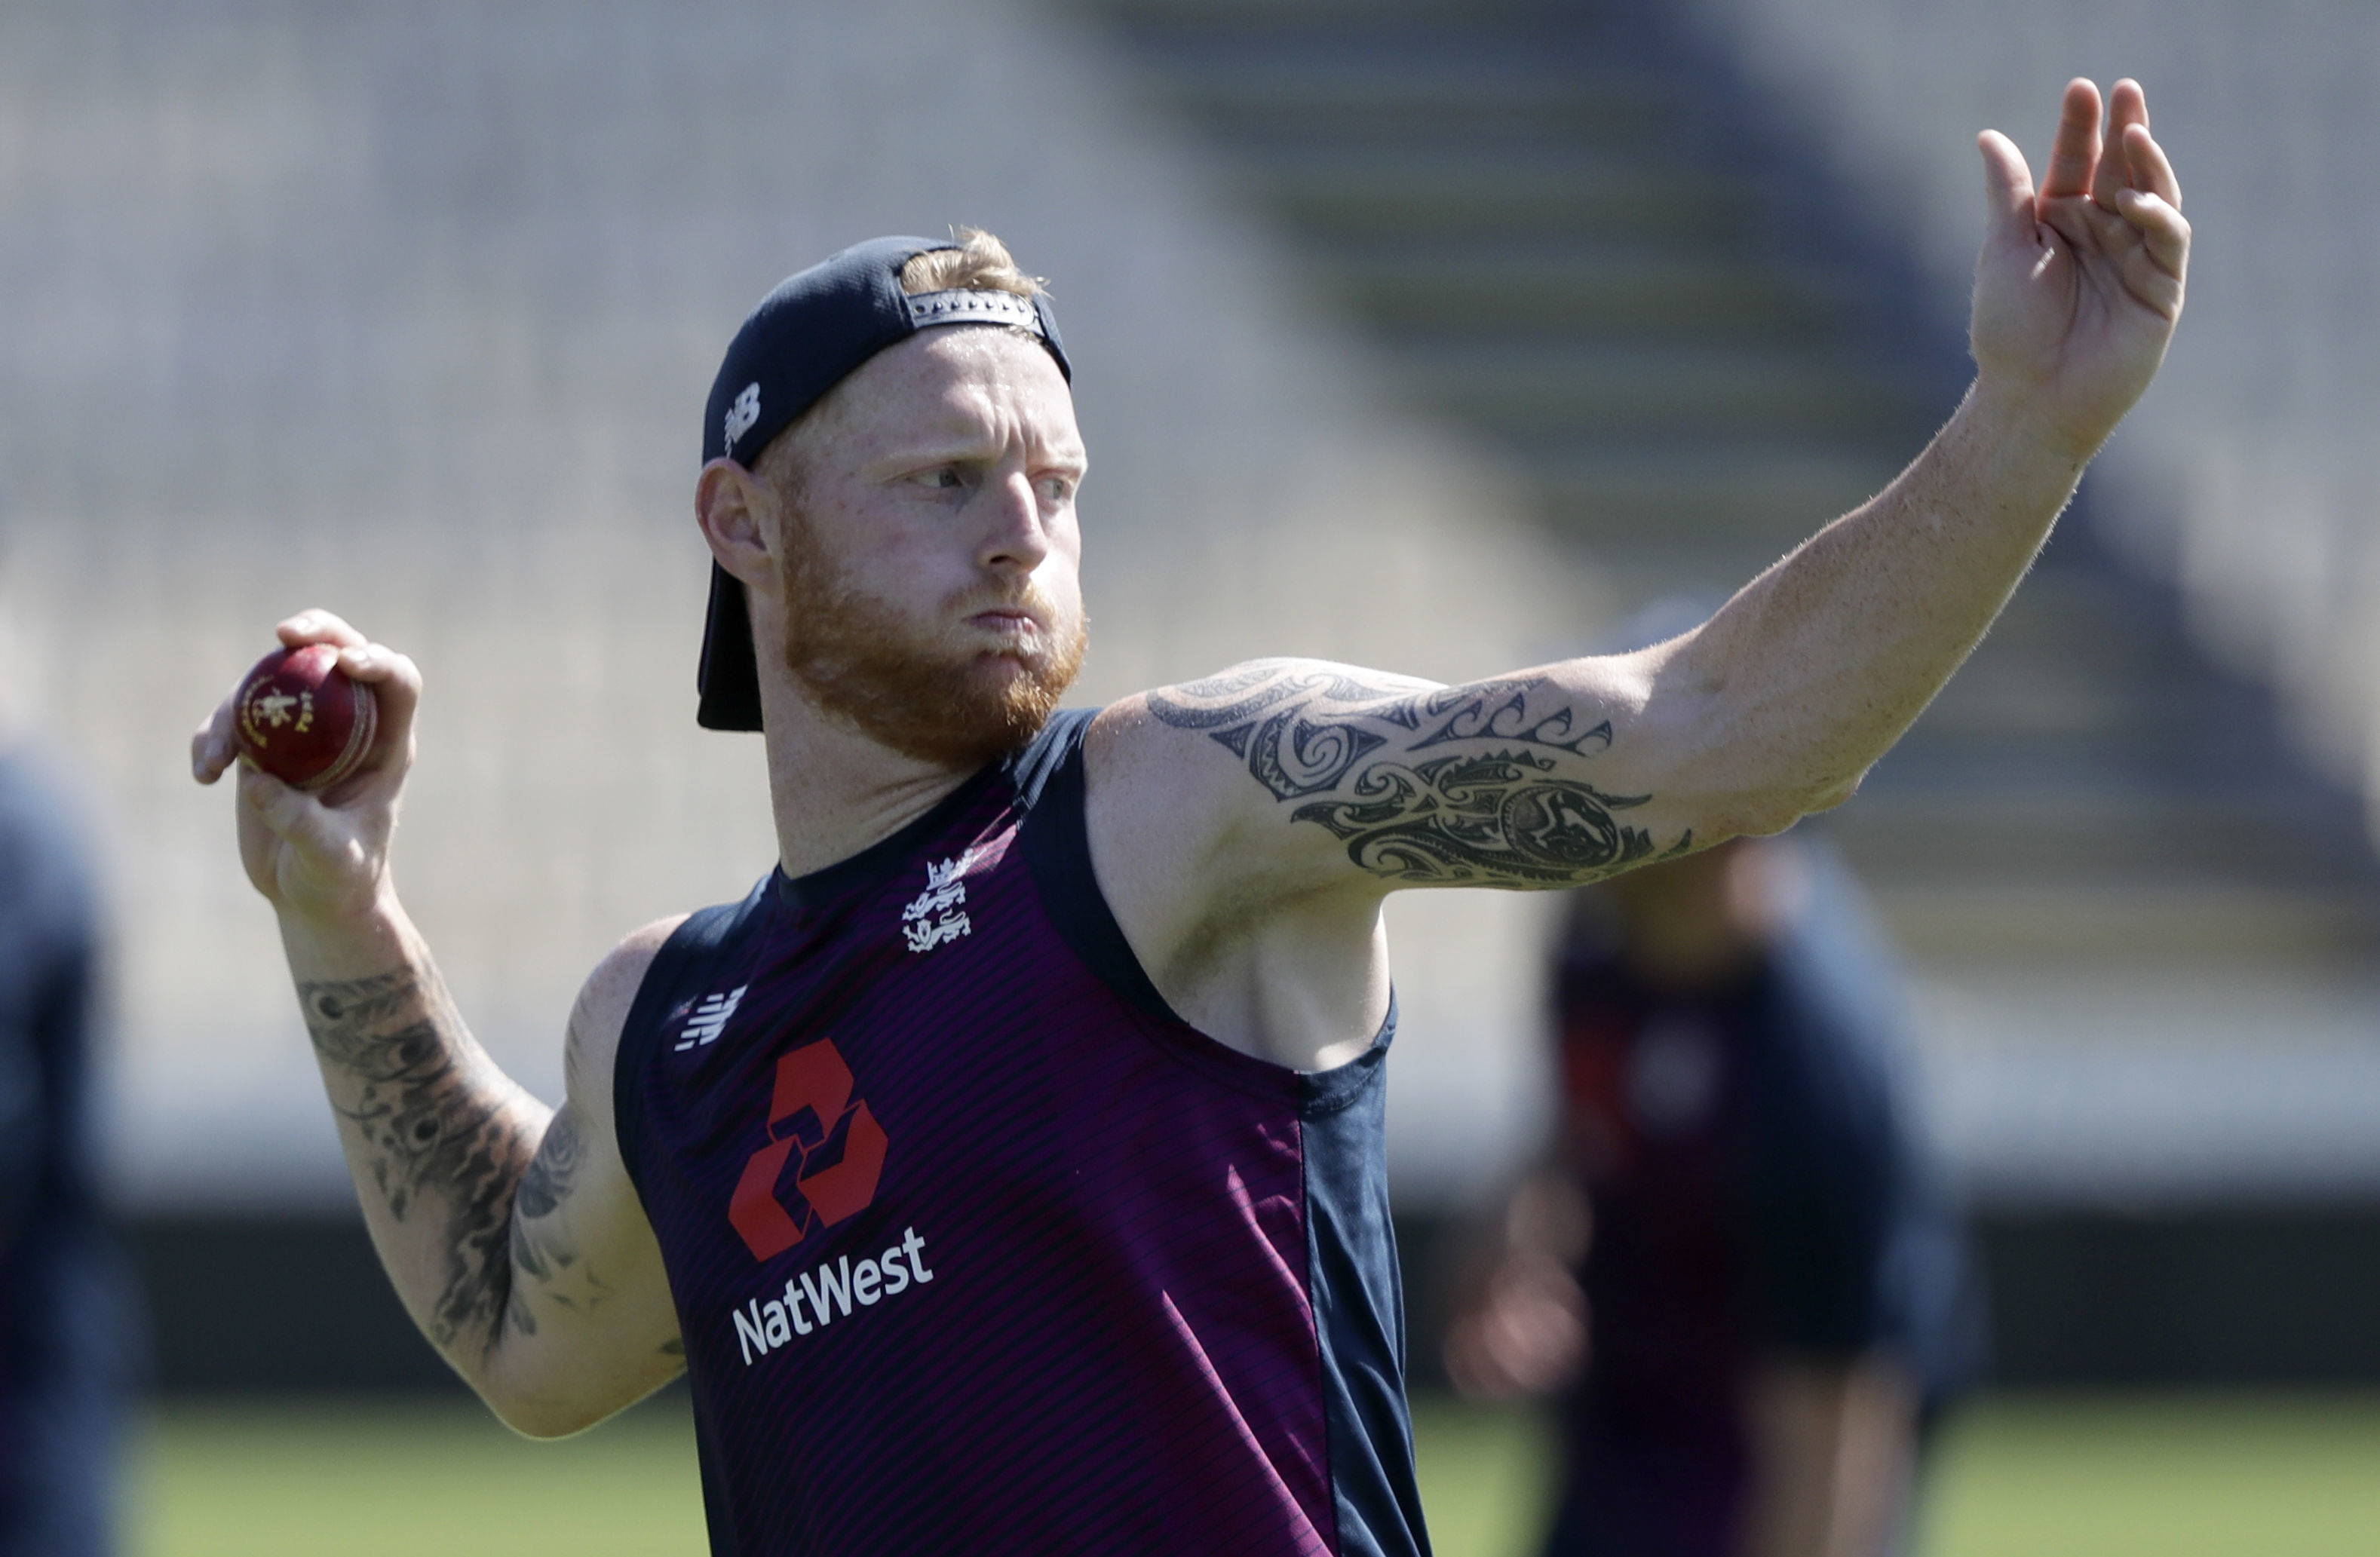 England's Ben Stokes throws the ball during a training session ahead of the second cricket test between England and New Zealand at Seddon Park in Hamilton, New Zealand, Wednesday, Nov. 27, 2019.